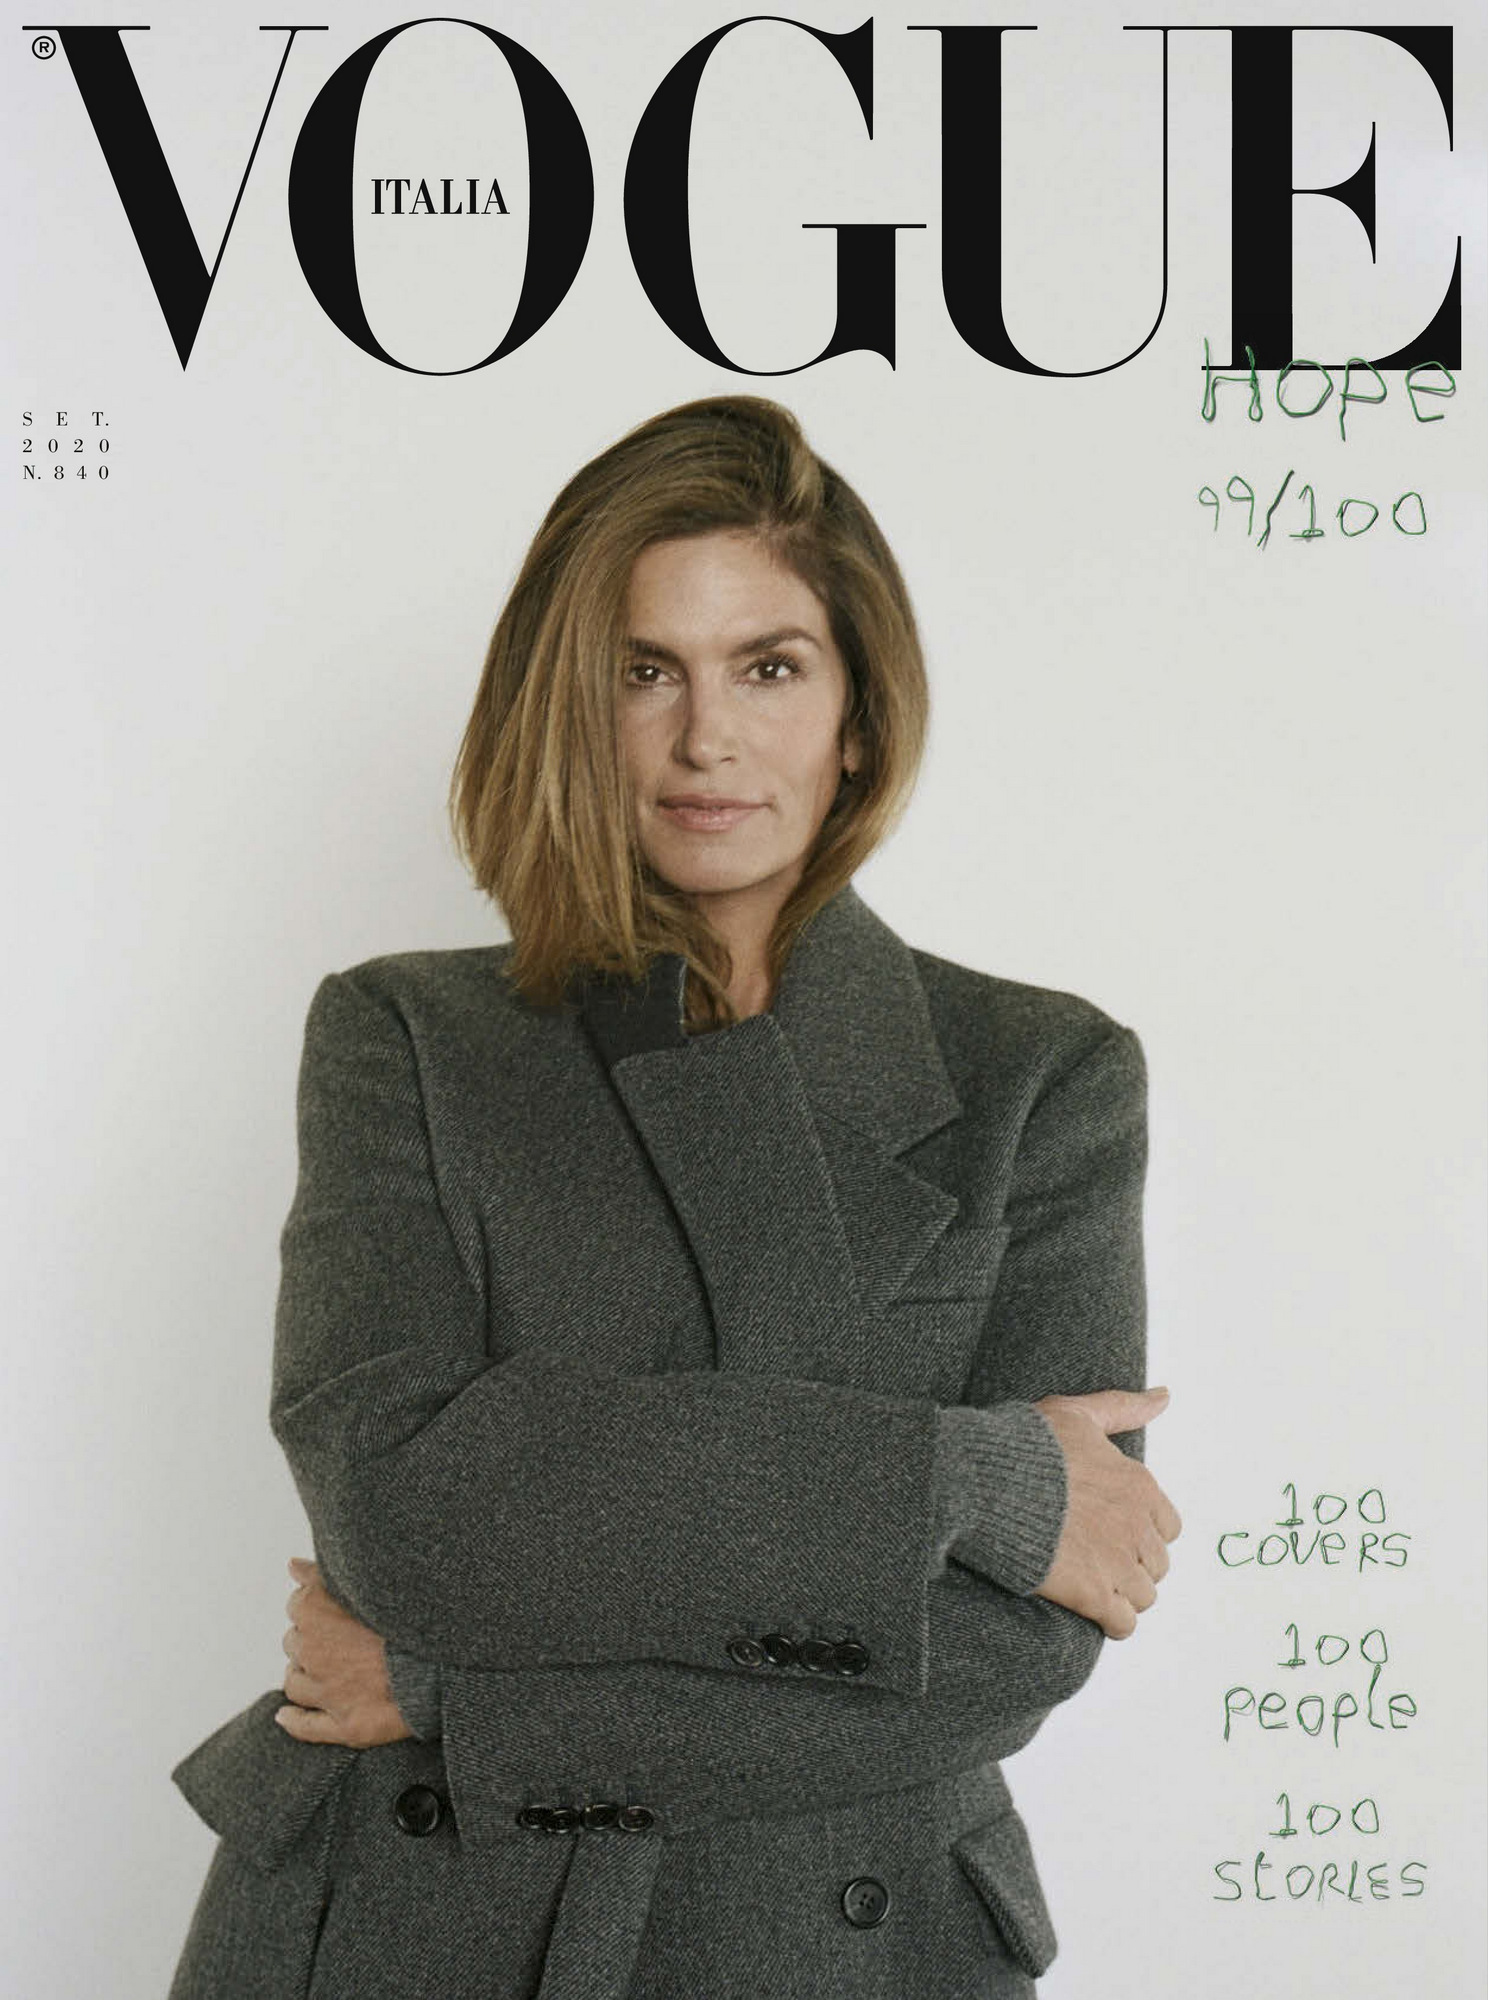 Photos n°8 : Models Get Together for 100 Vogue Covers!